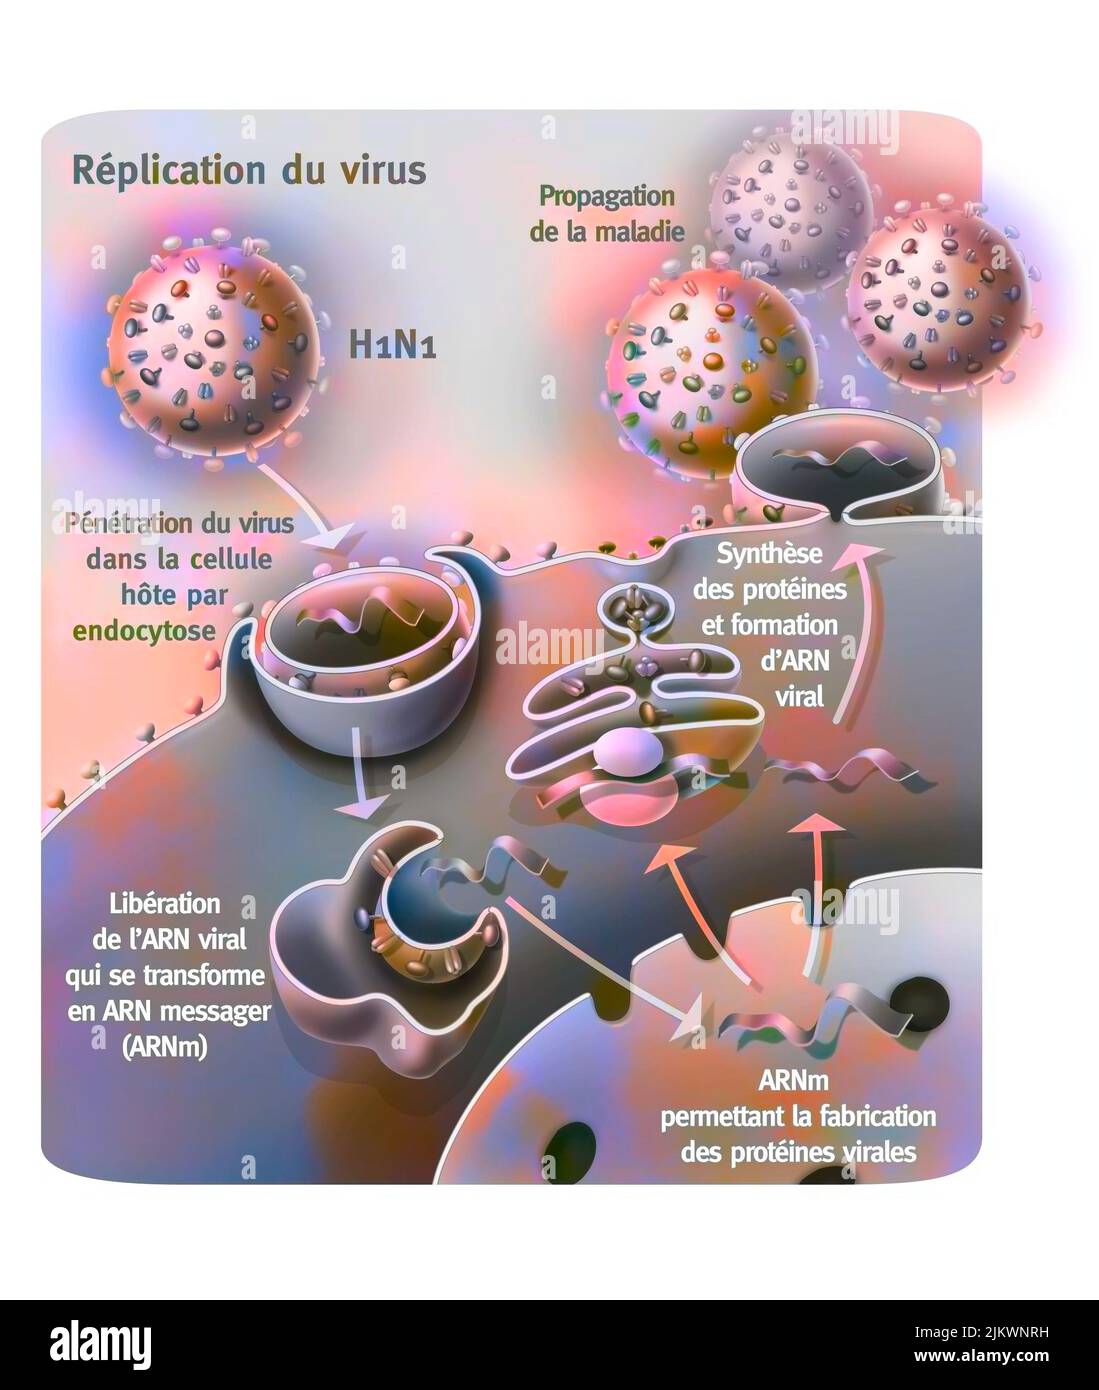 Penetration and replication of the H1N1 virus through a host cell. Stock Photo